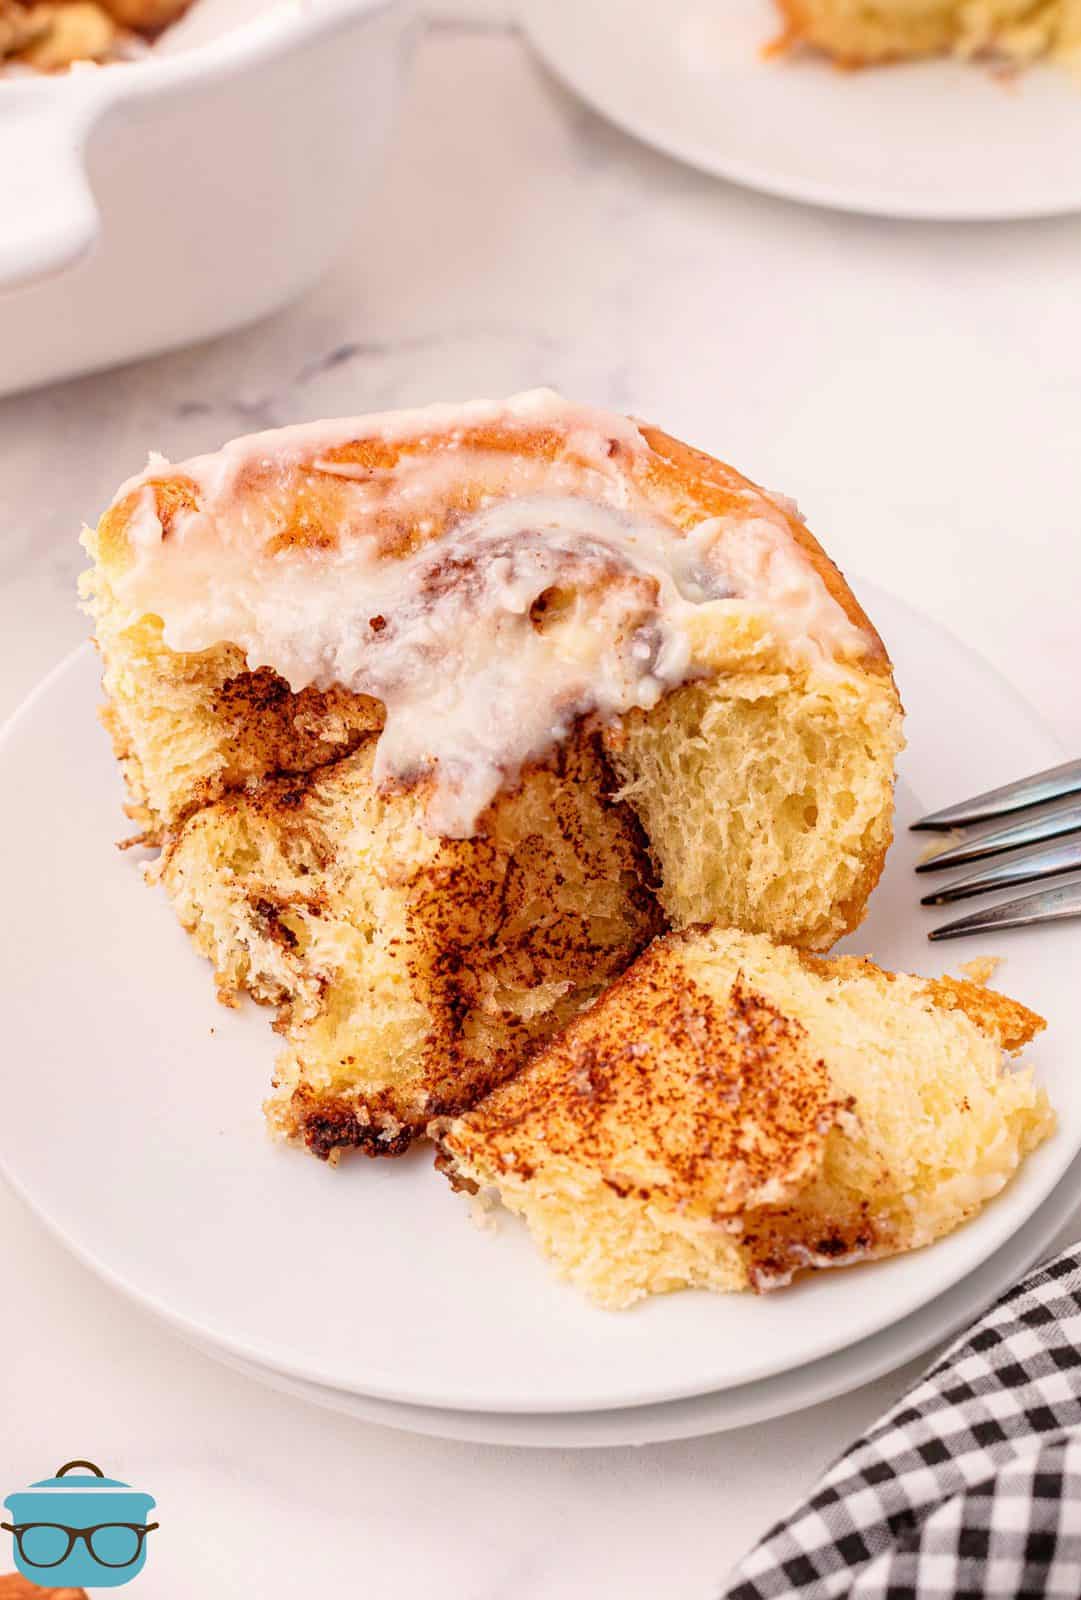 One Homemade Cinnamon Roll on plate cut open showing filling.